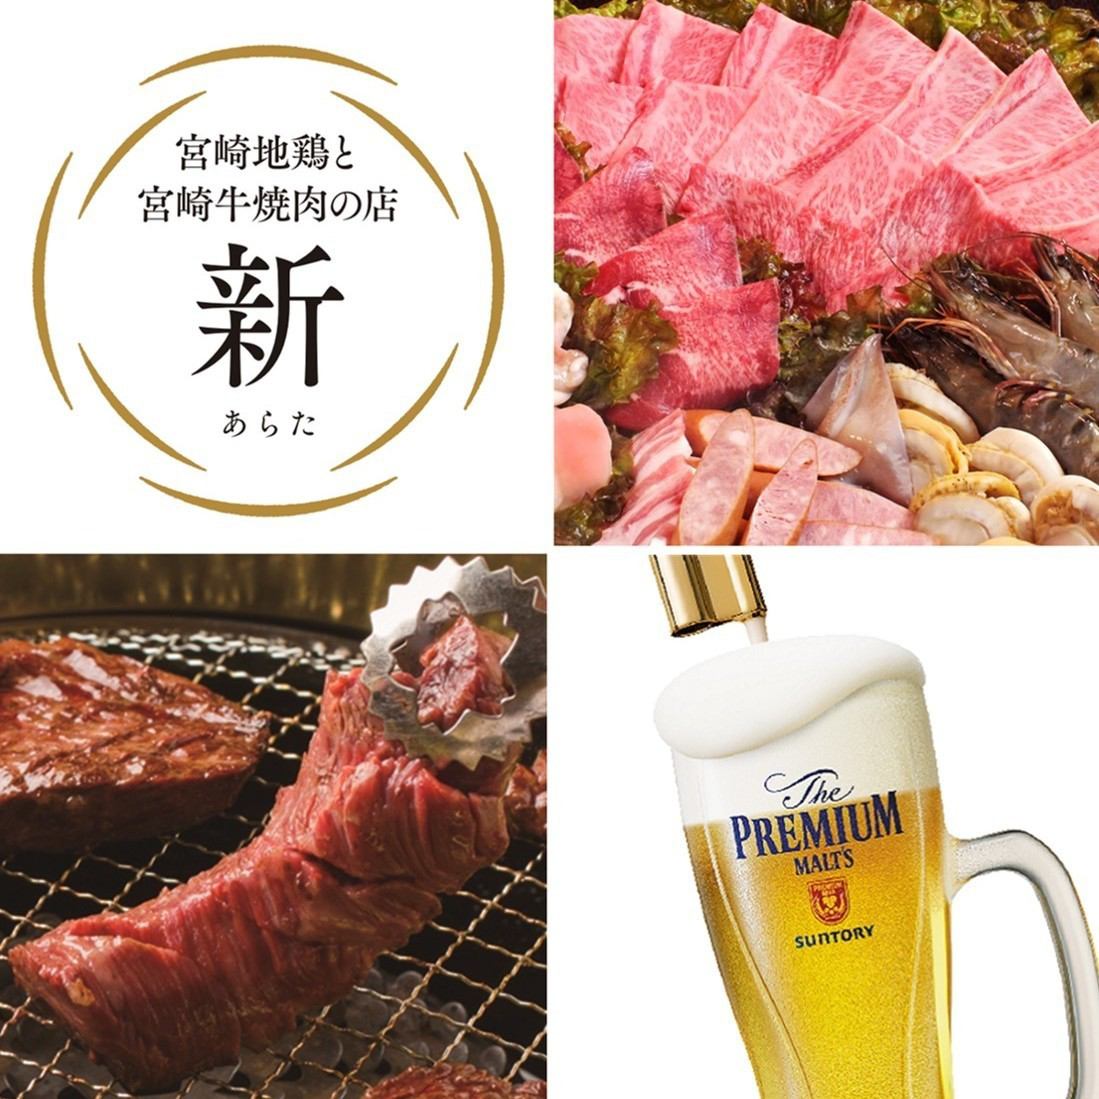 Enjoy it with your favorite dish♪All-you-can-drink for 1,738 yen (tax included)!